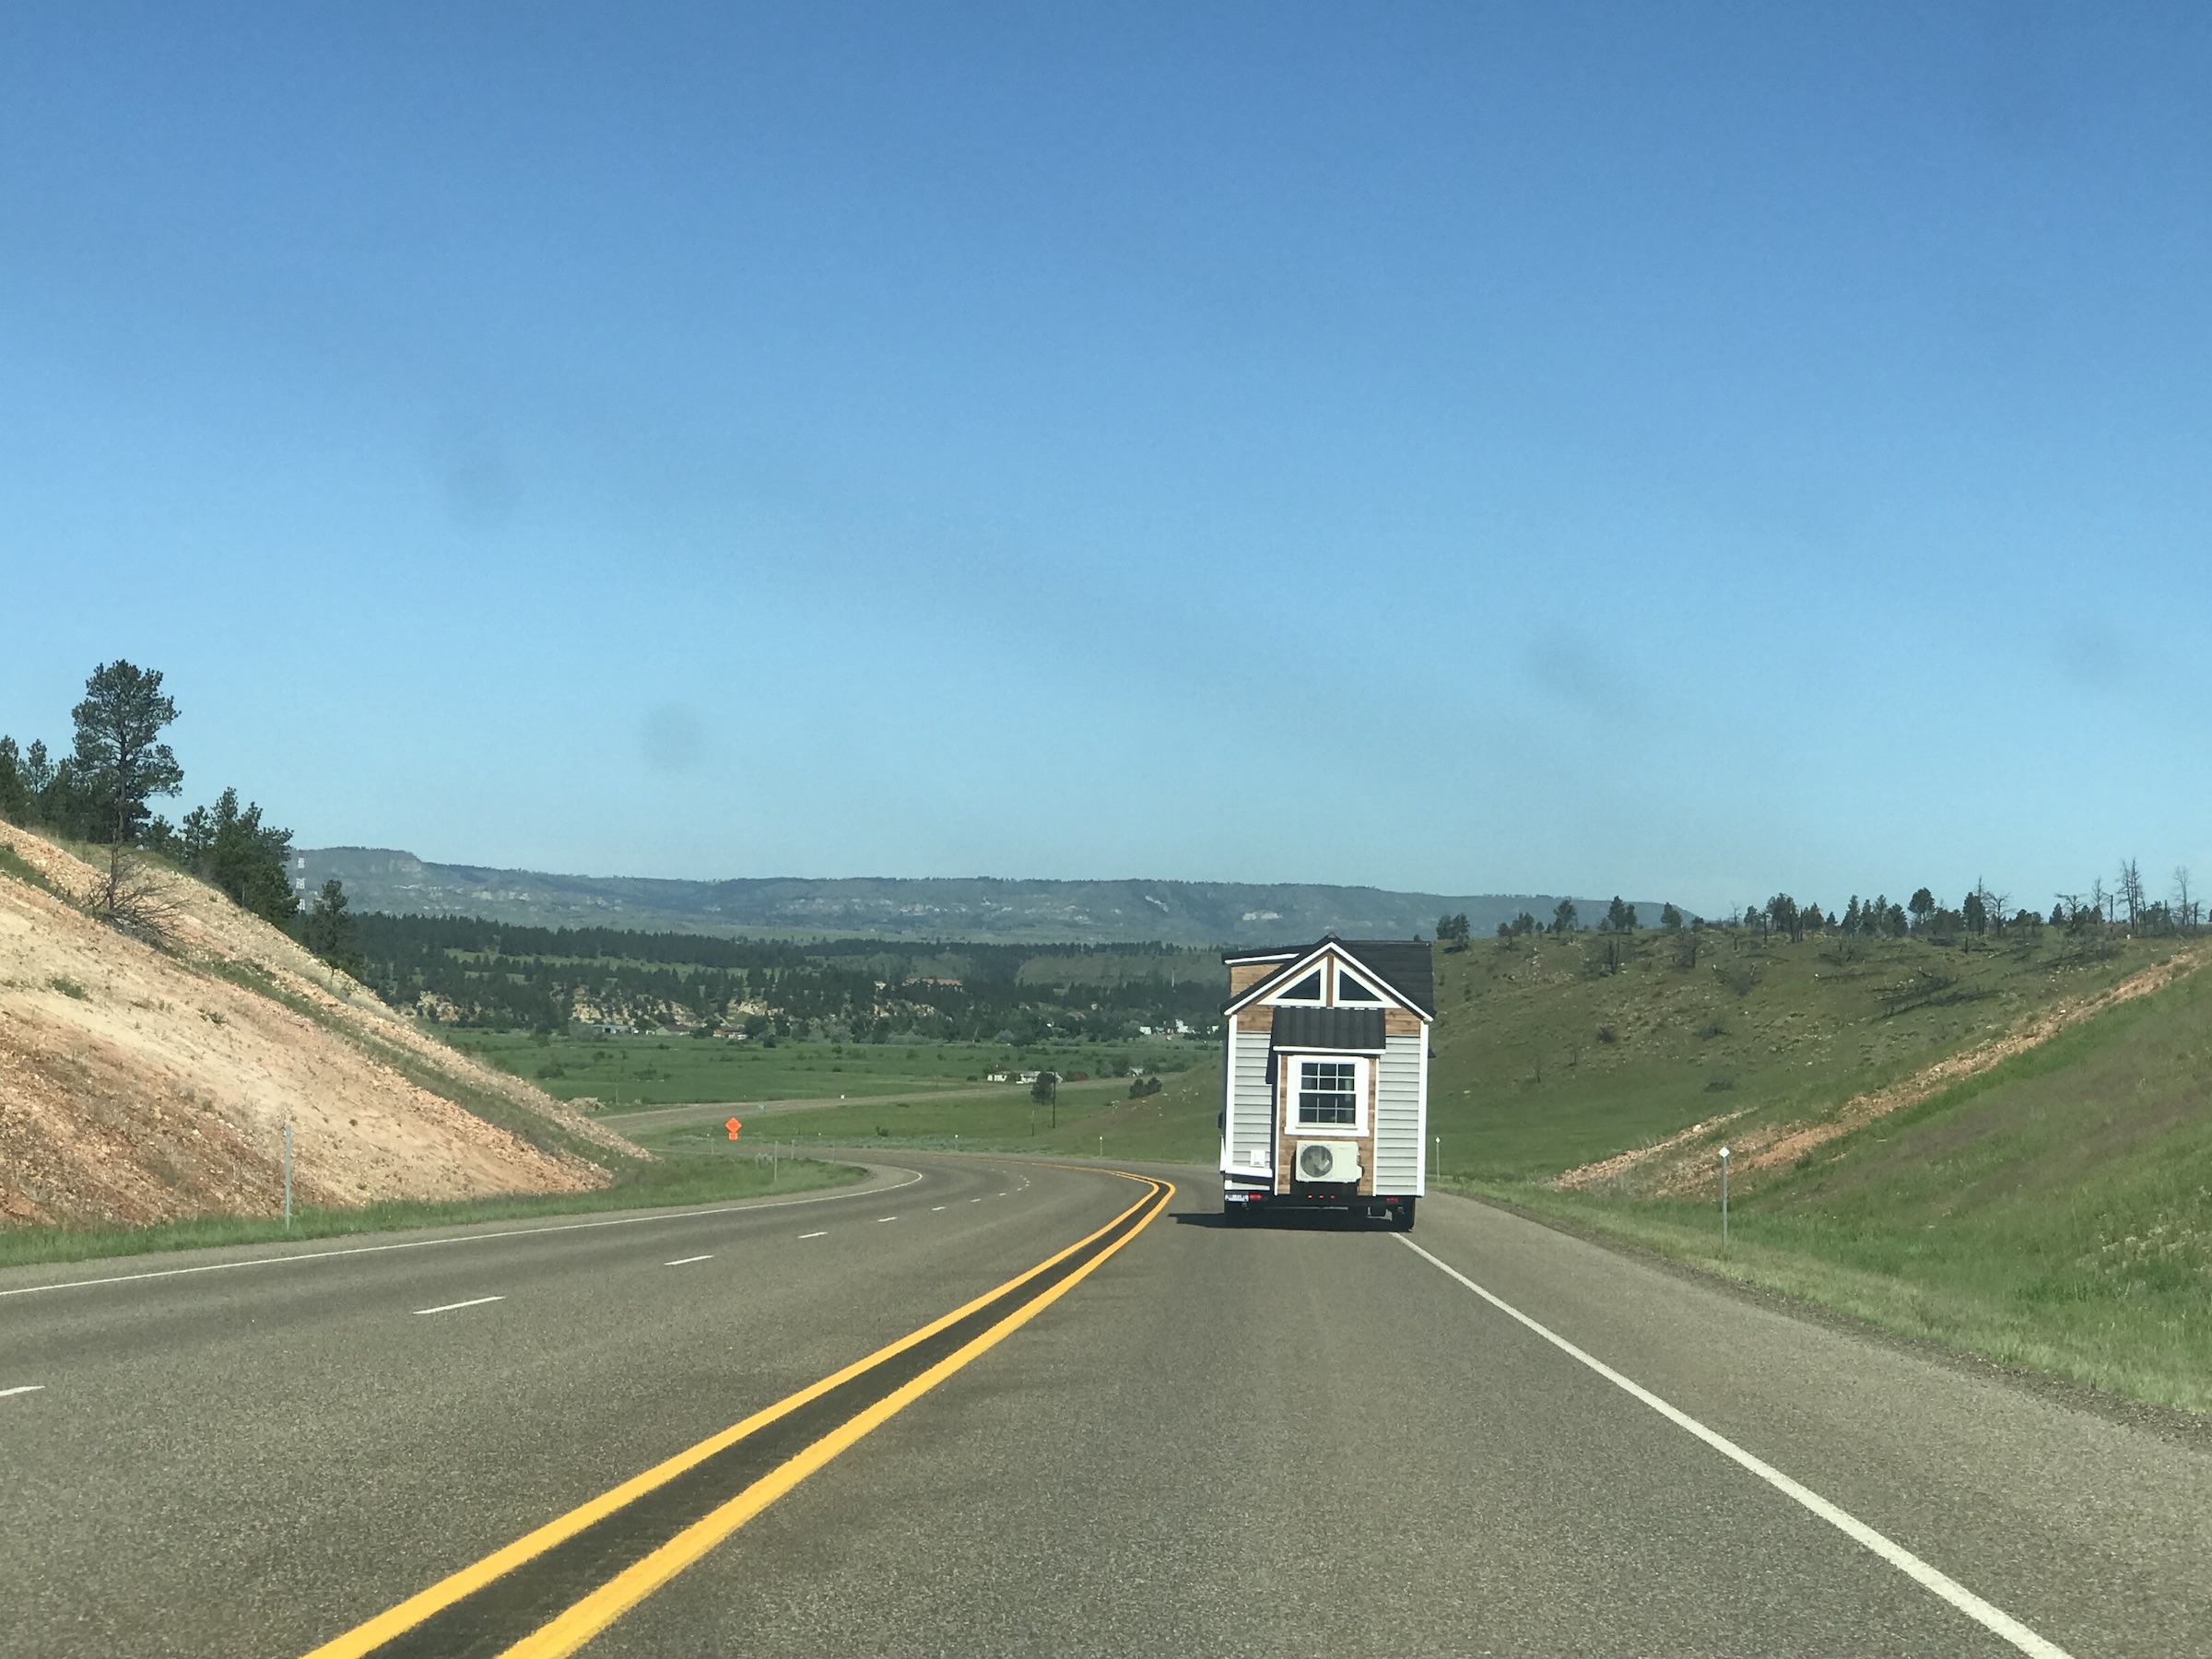 Driving through Montana with our Tiny House